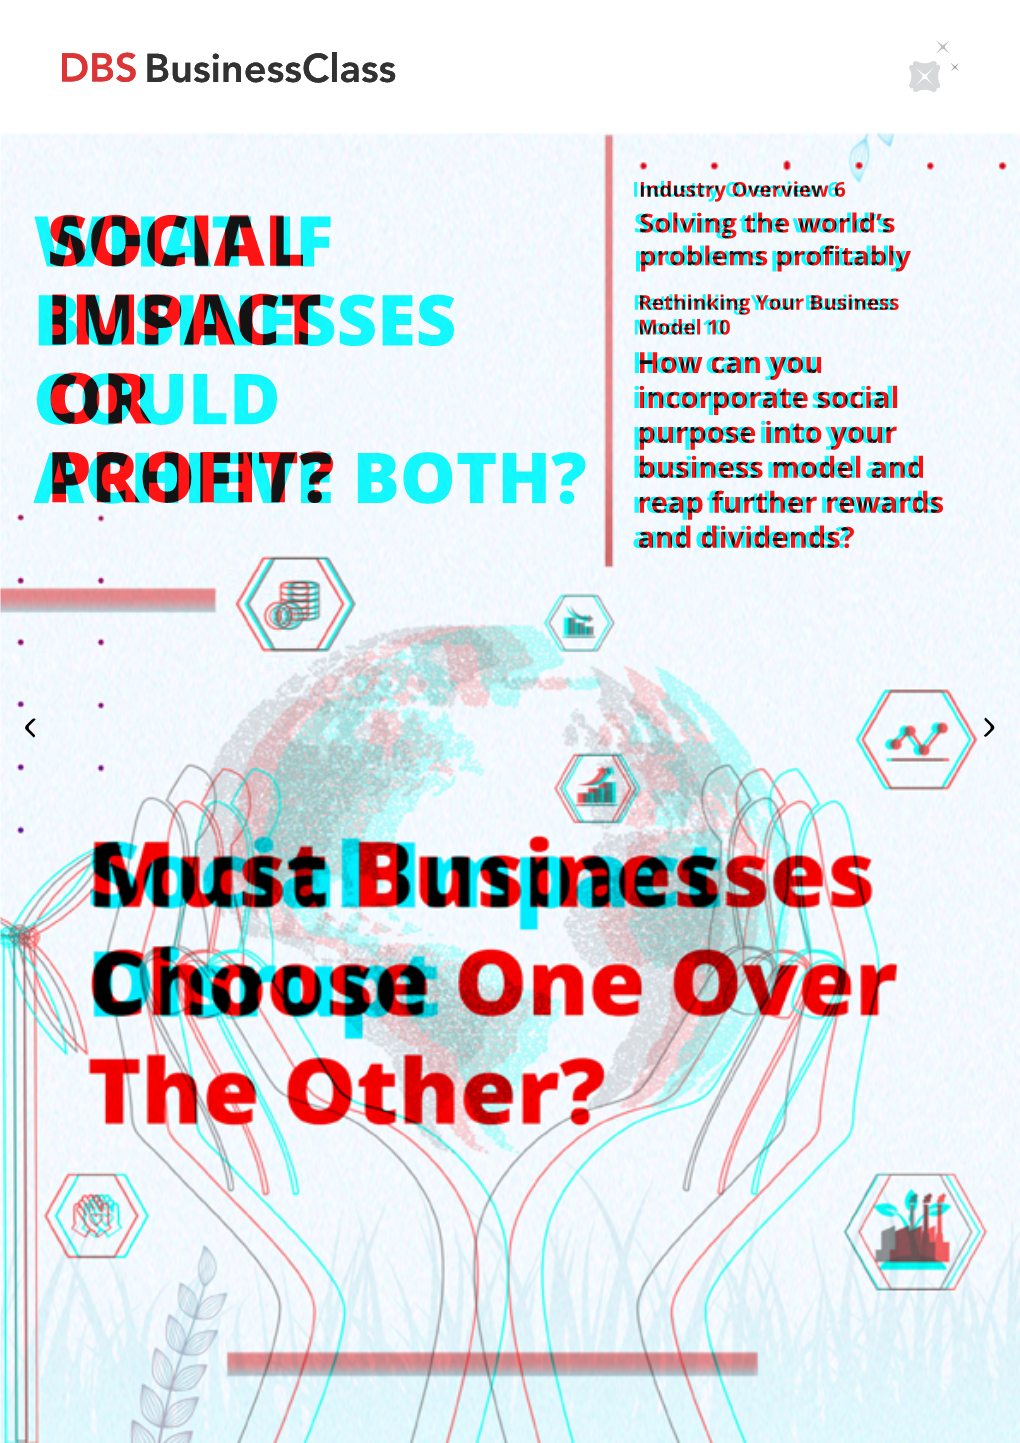 Social Impact Or Profit? What If Businesses Could Achieve